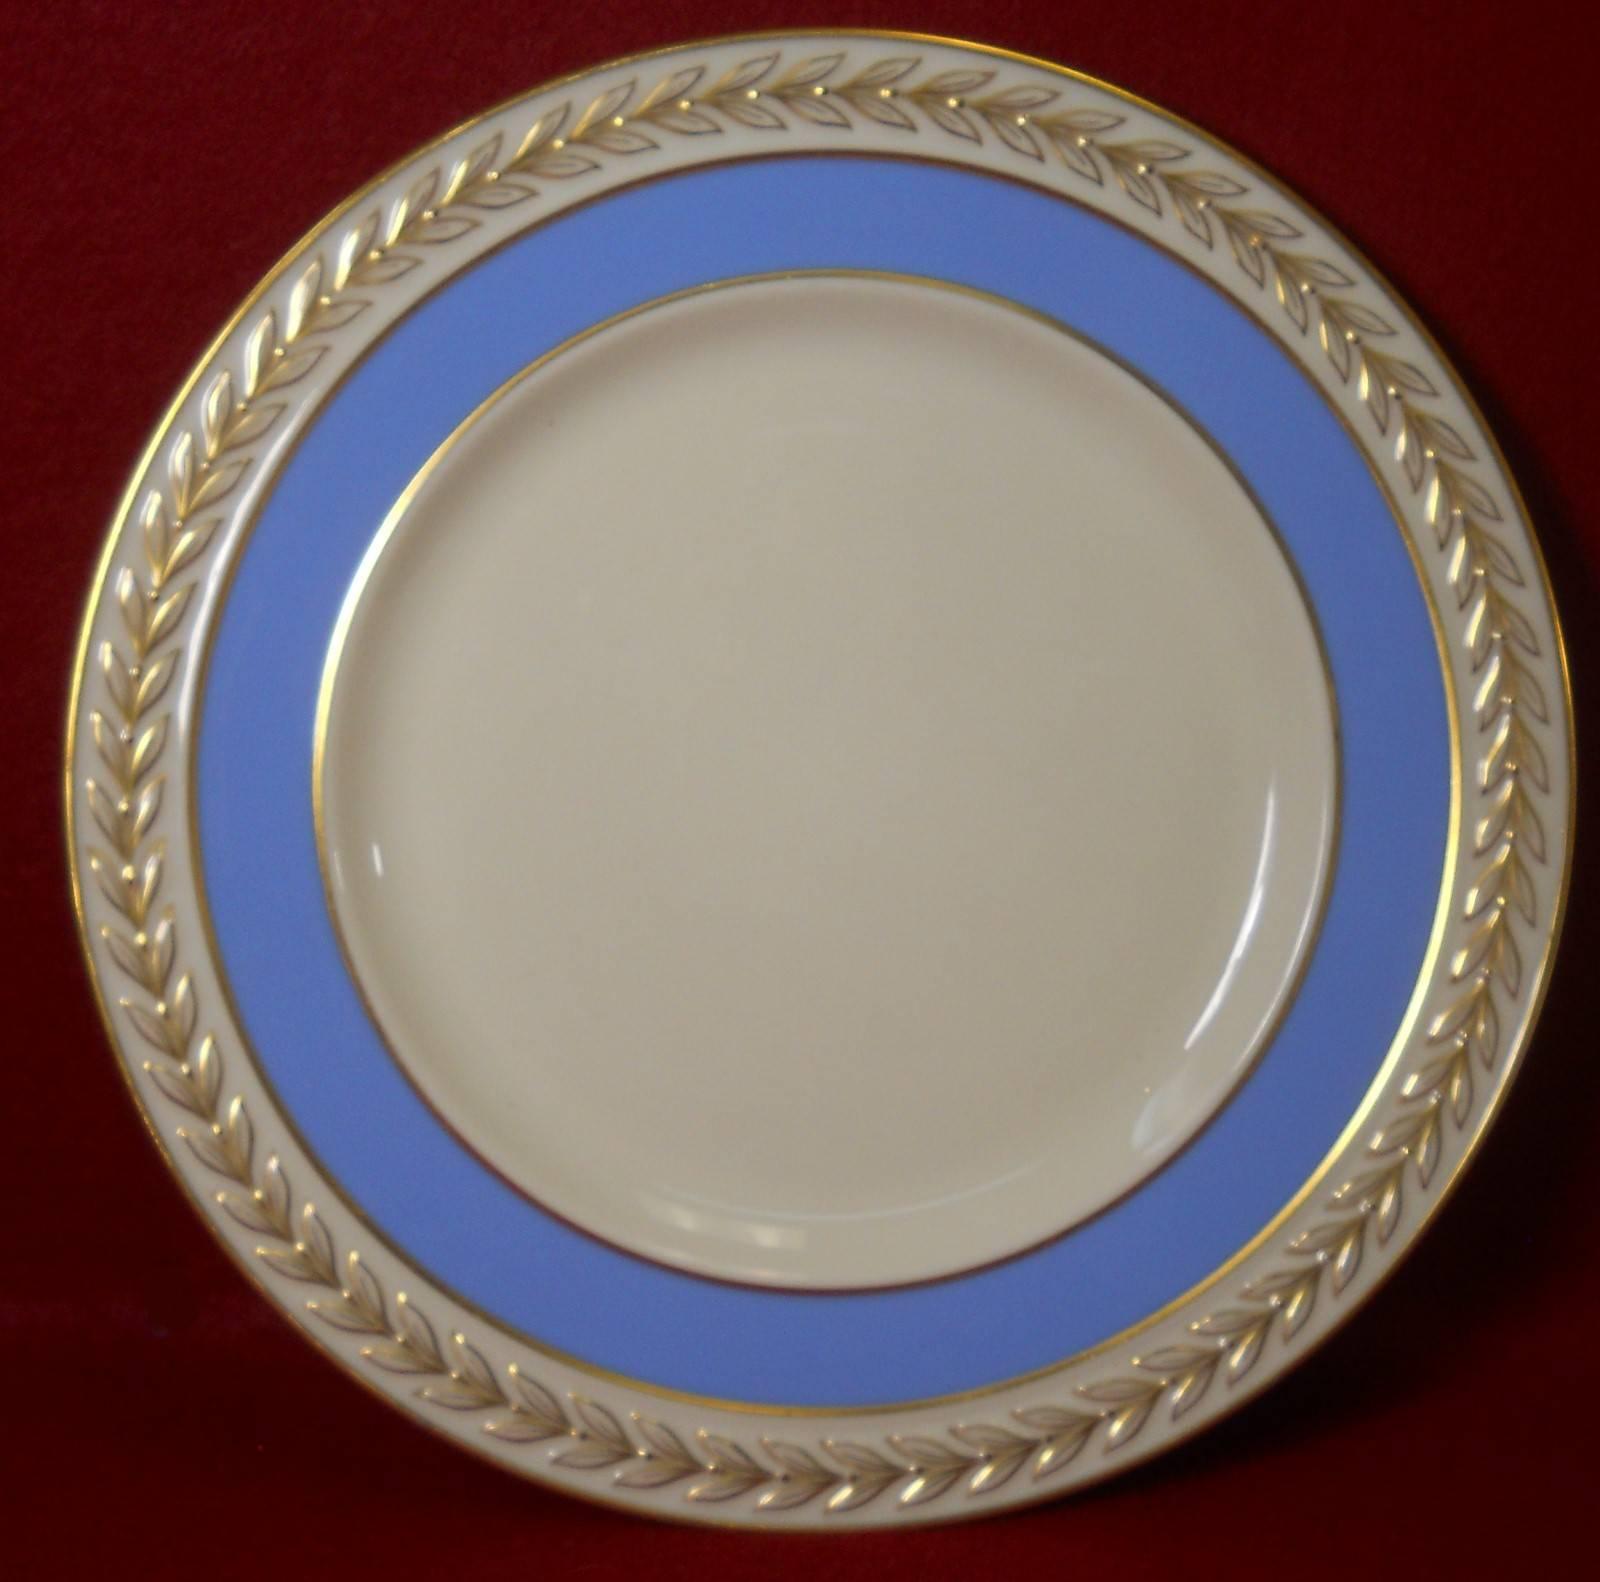 CHINA FINDERS

China, Crystal, Flatware and Collectible Matching Service is offering ONE (1) 

LENOX china FONTAINE light blue J417X17-6 pattern Set of Twelve (12) Dinner Plates

in great condition free from chips, cracks, crazing, break,